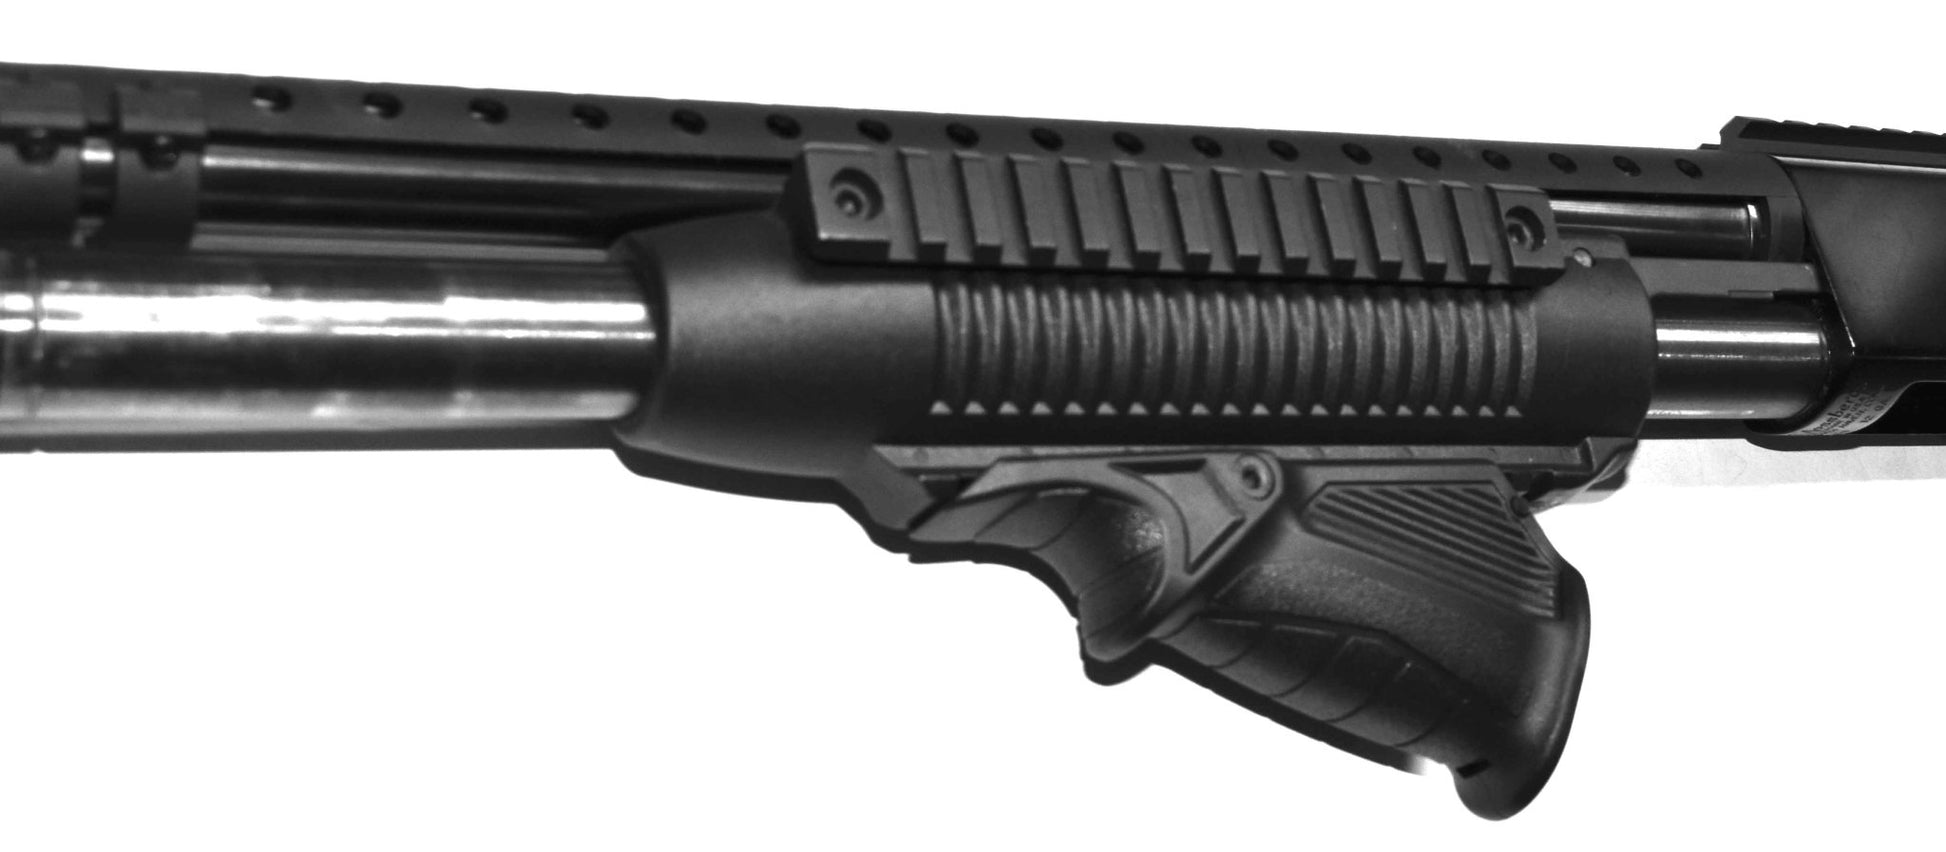 Mossberg 590 12 Gauge Pump Action Handguard With Angled Foregrip black. - TRINITY SUPPLY INC